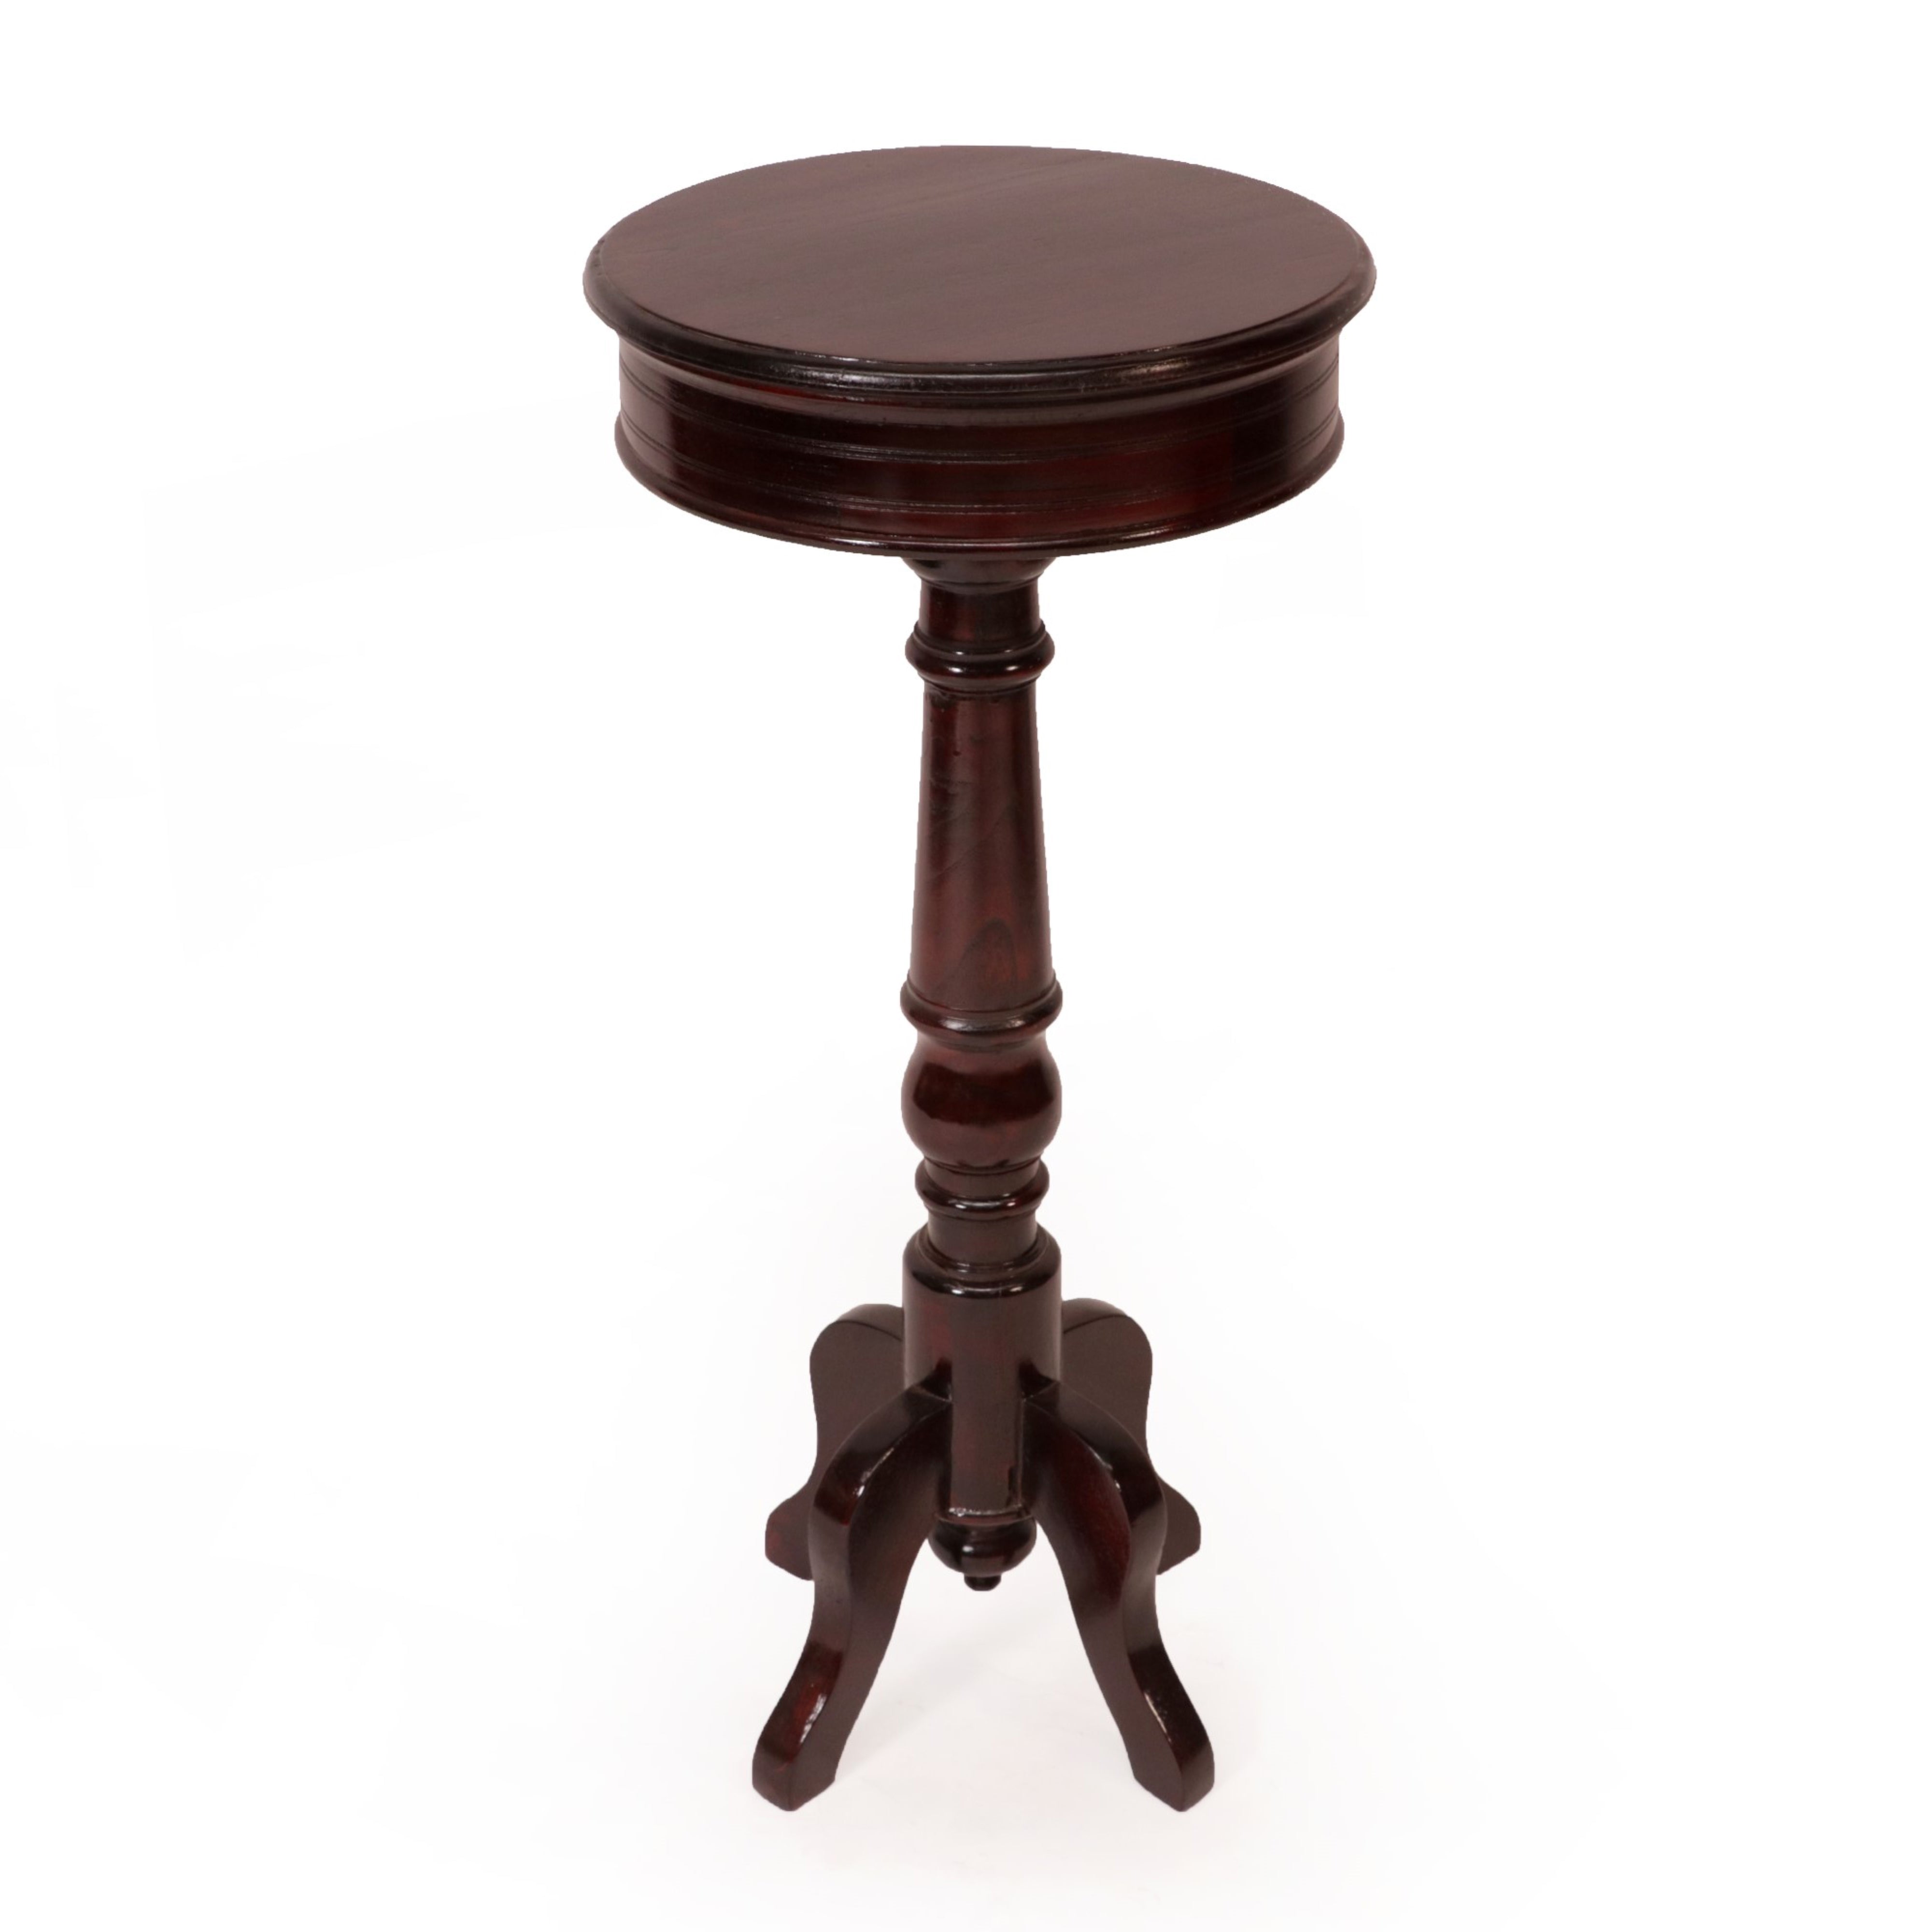 Compact Teak End Table (Large (16 x 16 x 35.5 Inch)) End Table